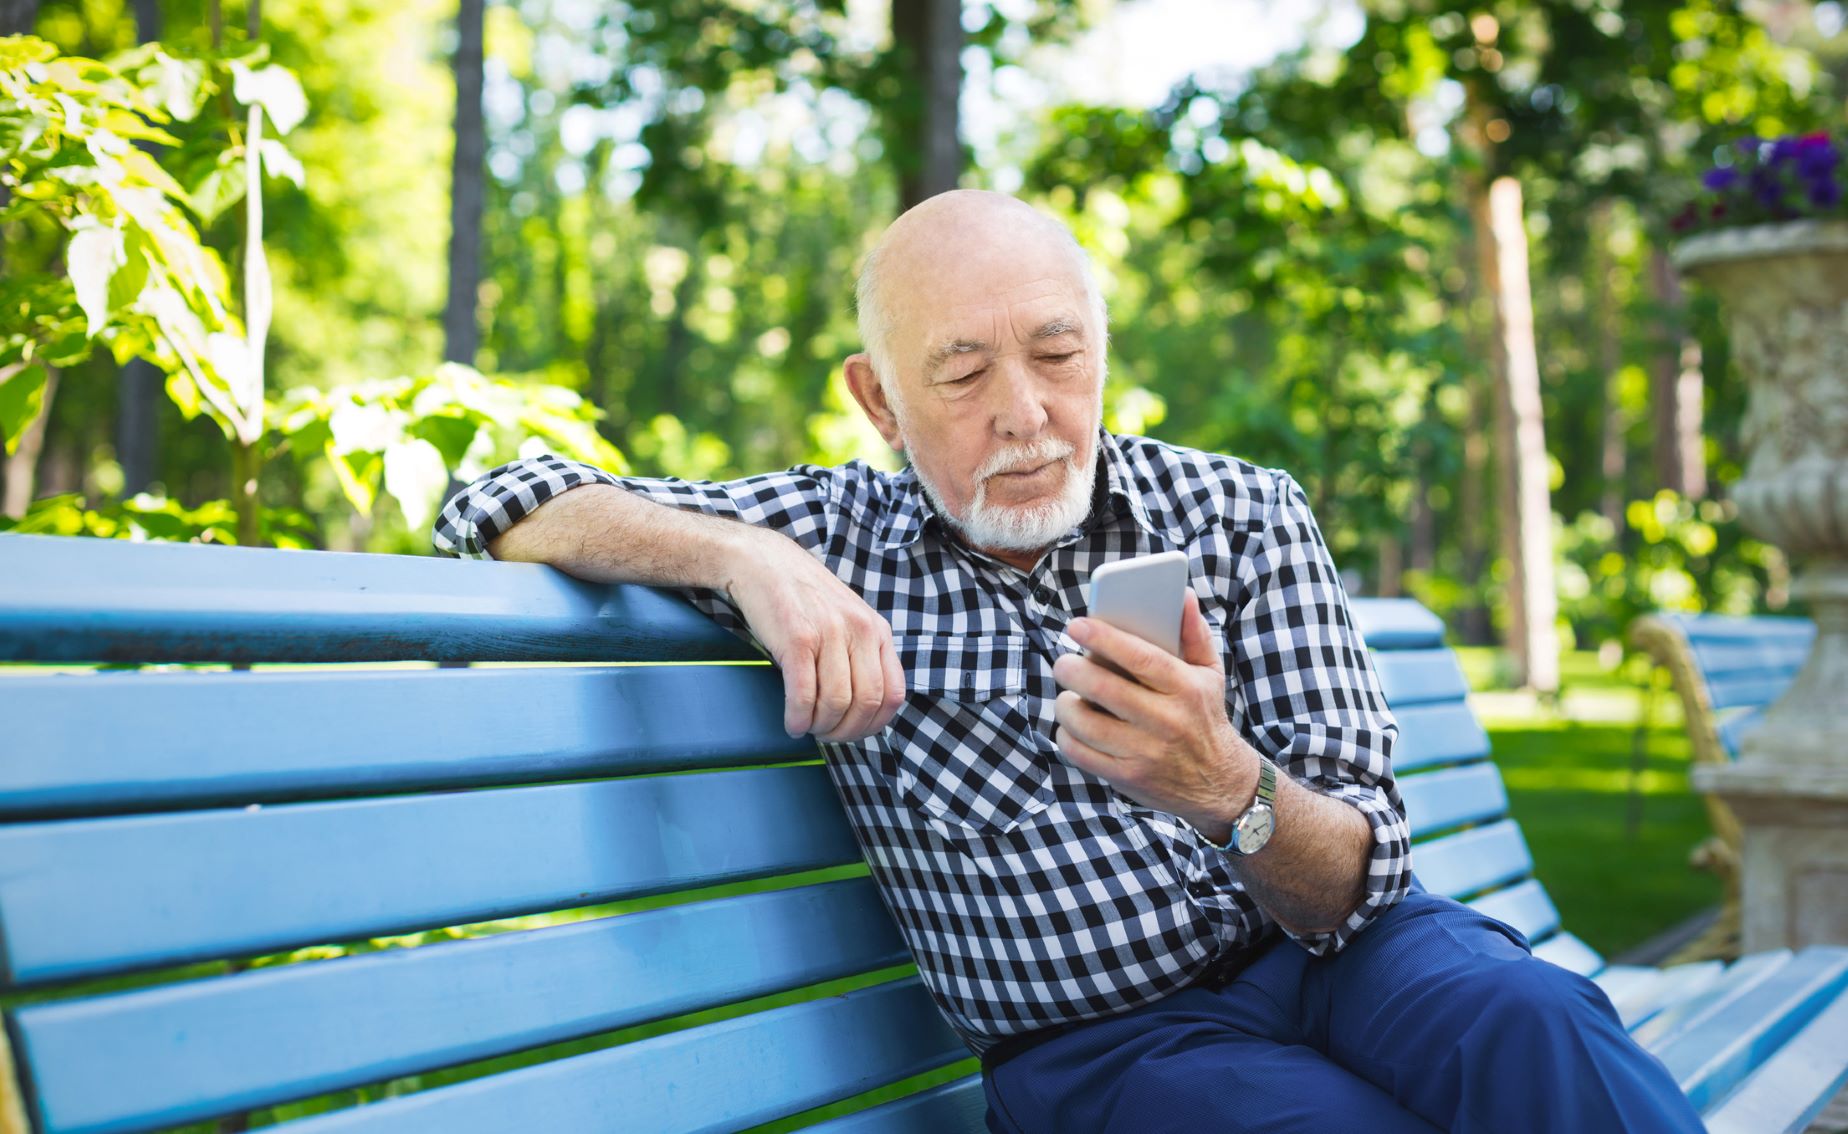 Senior man reading email on his phone while sitting on a park bench